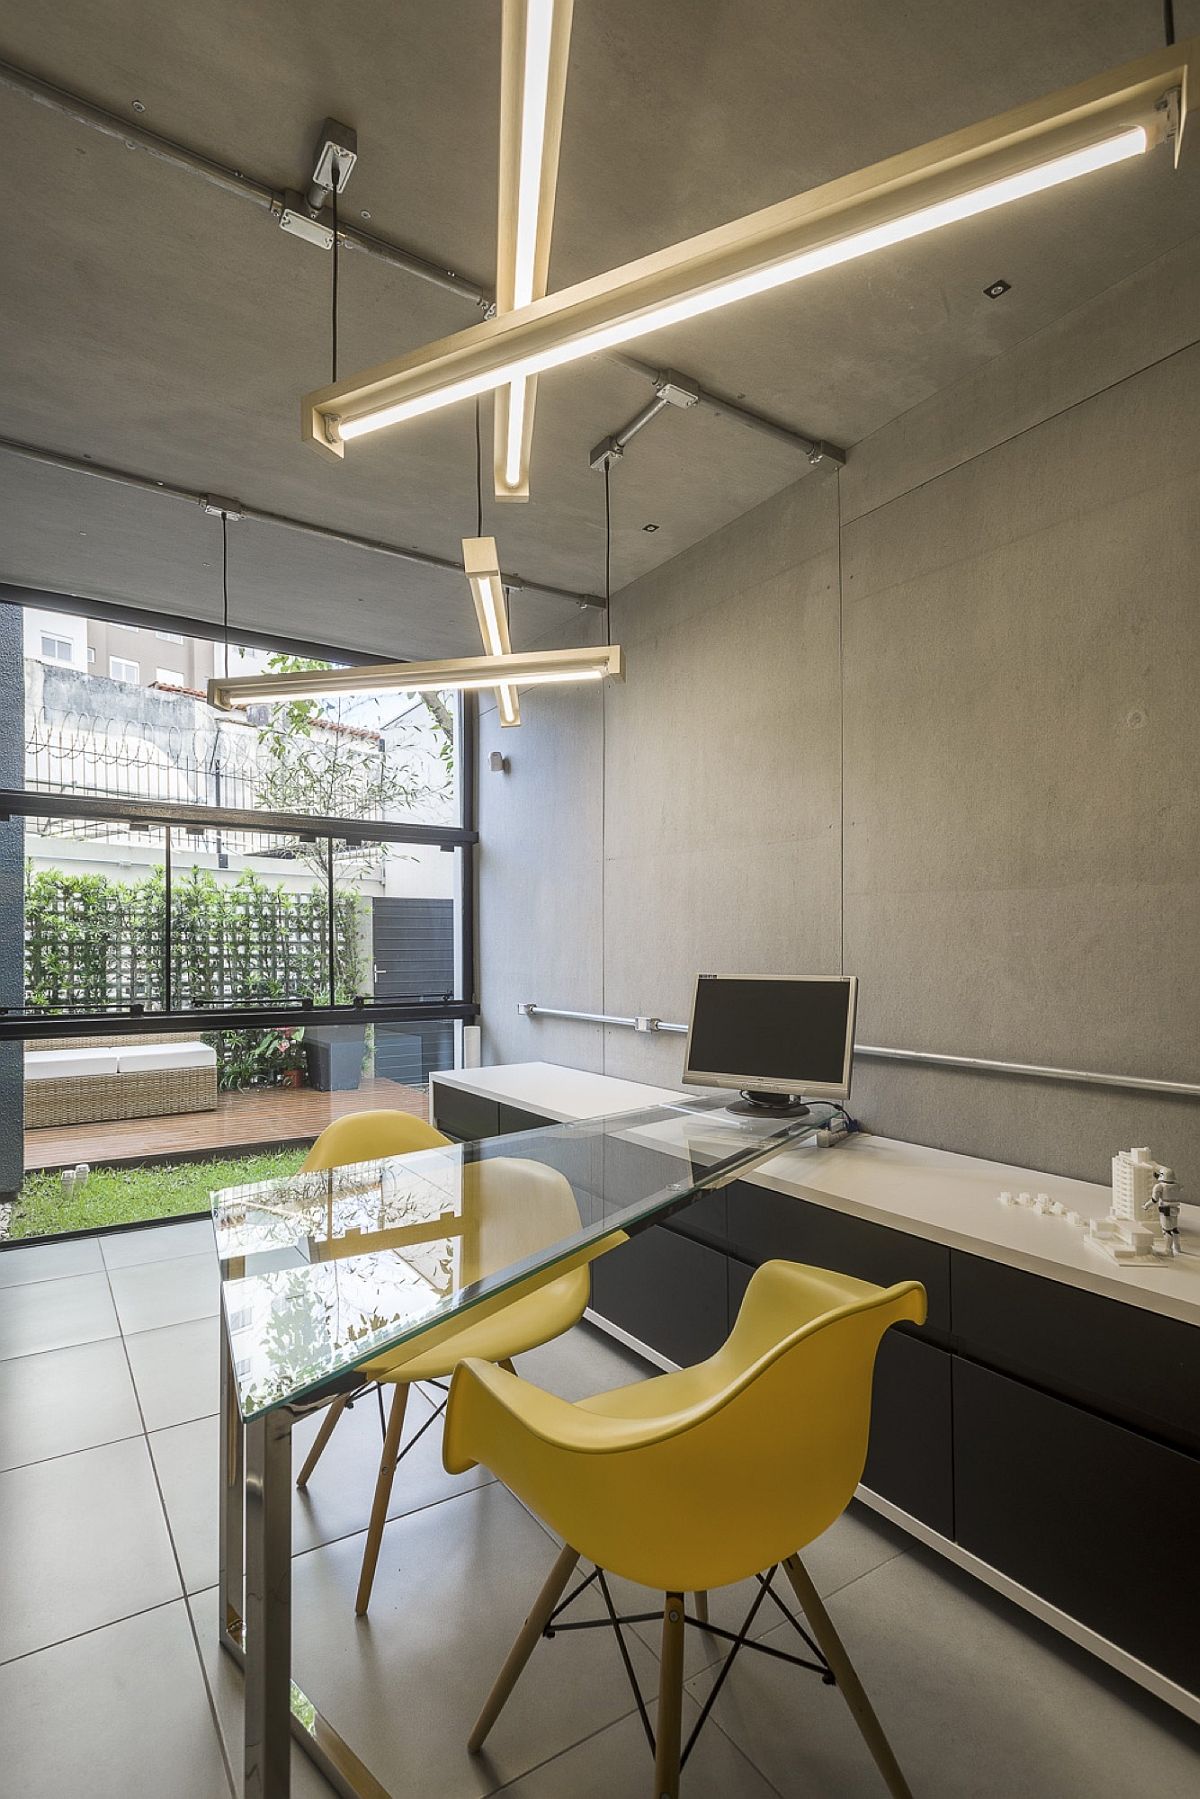 Tubelight-lighting-for-the-simple-and-industrial-office